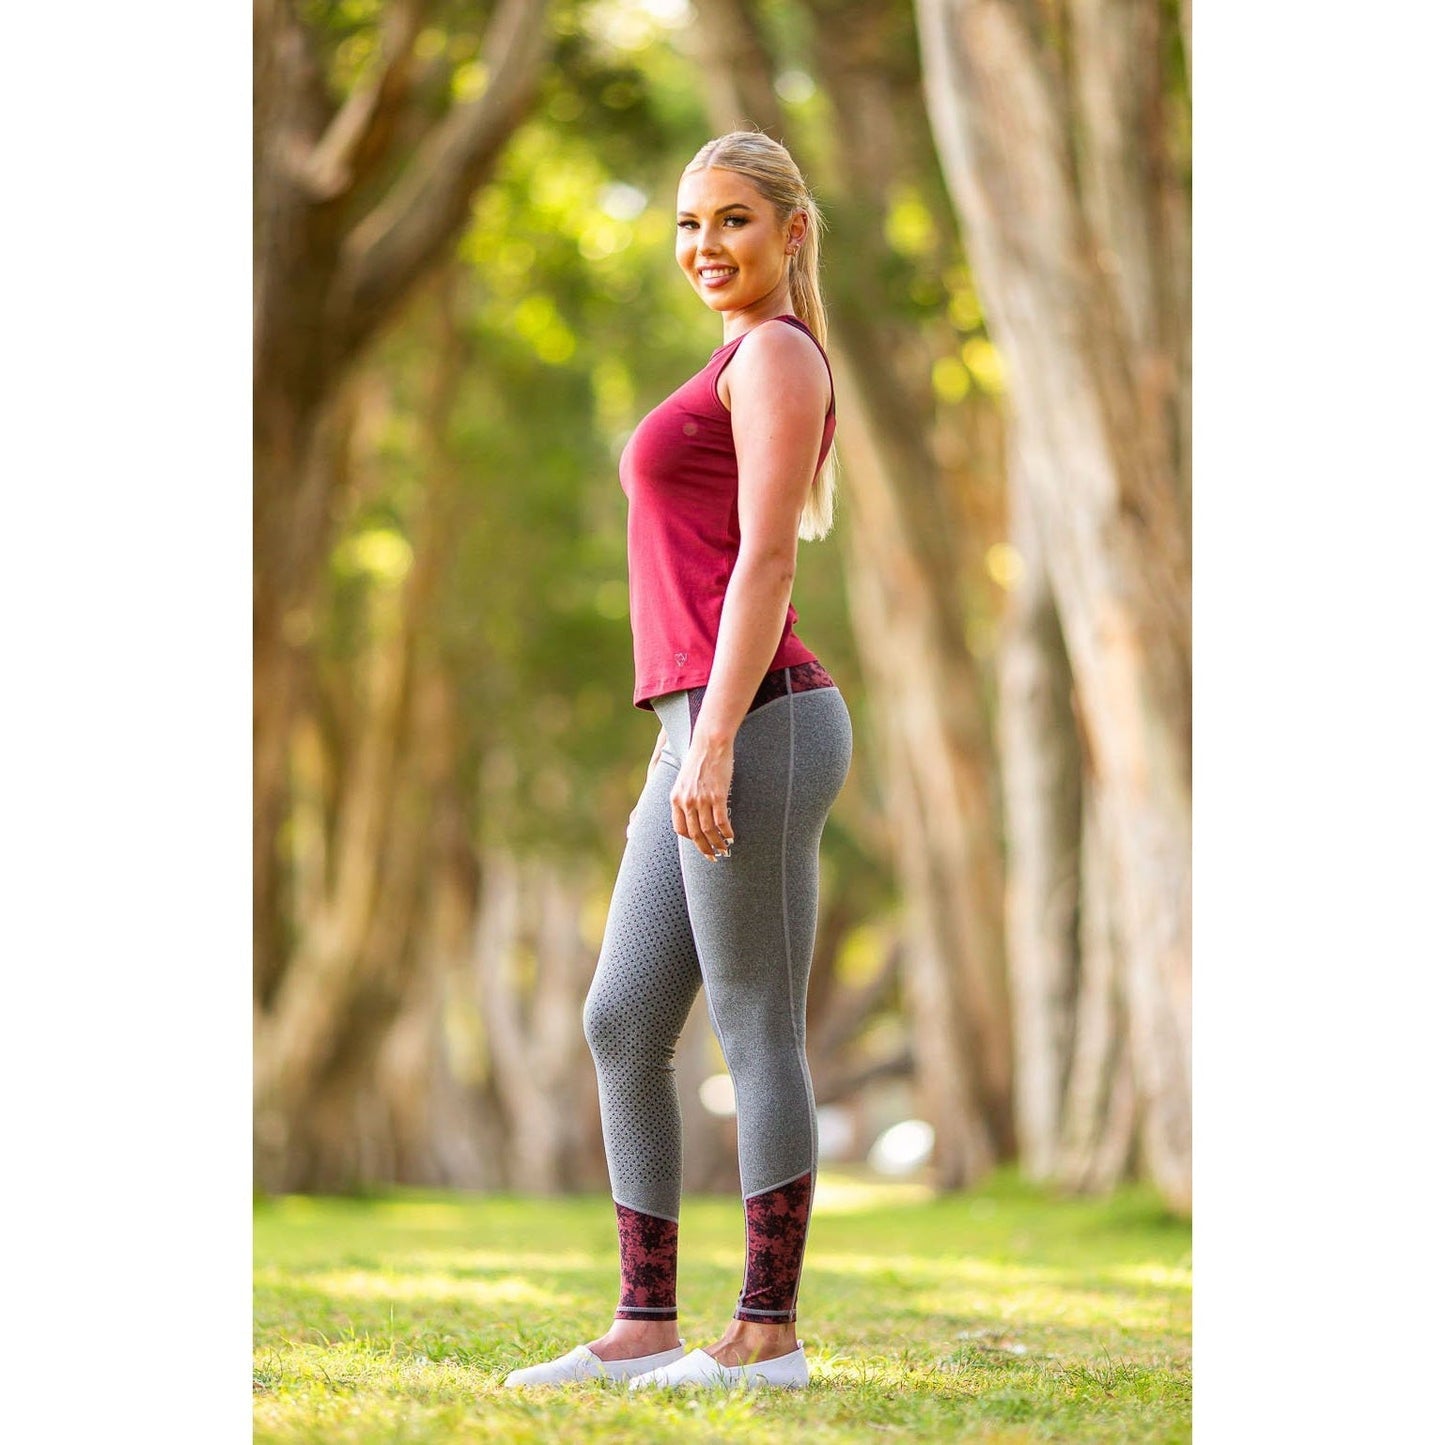 Woman in stylish horse riding tights stands smiling outdoors.